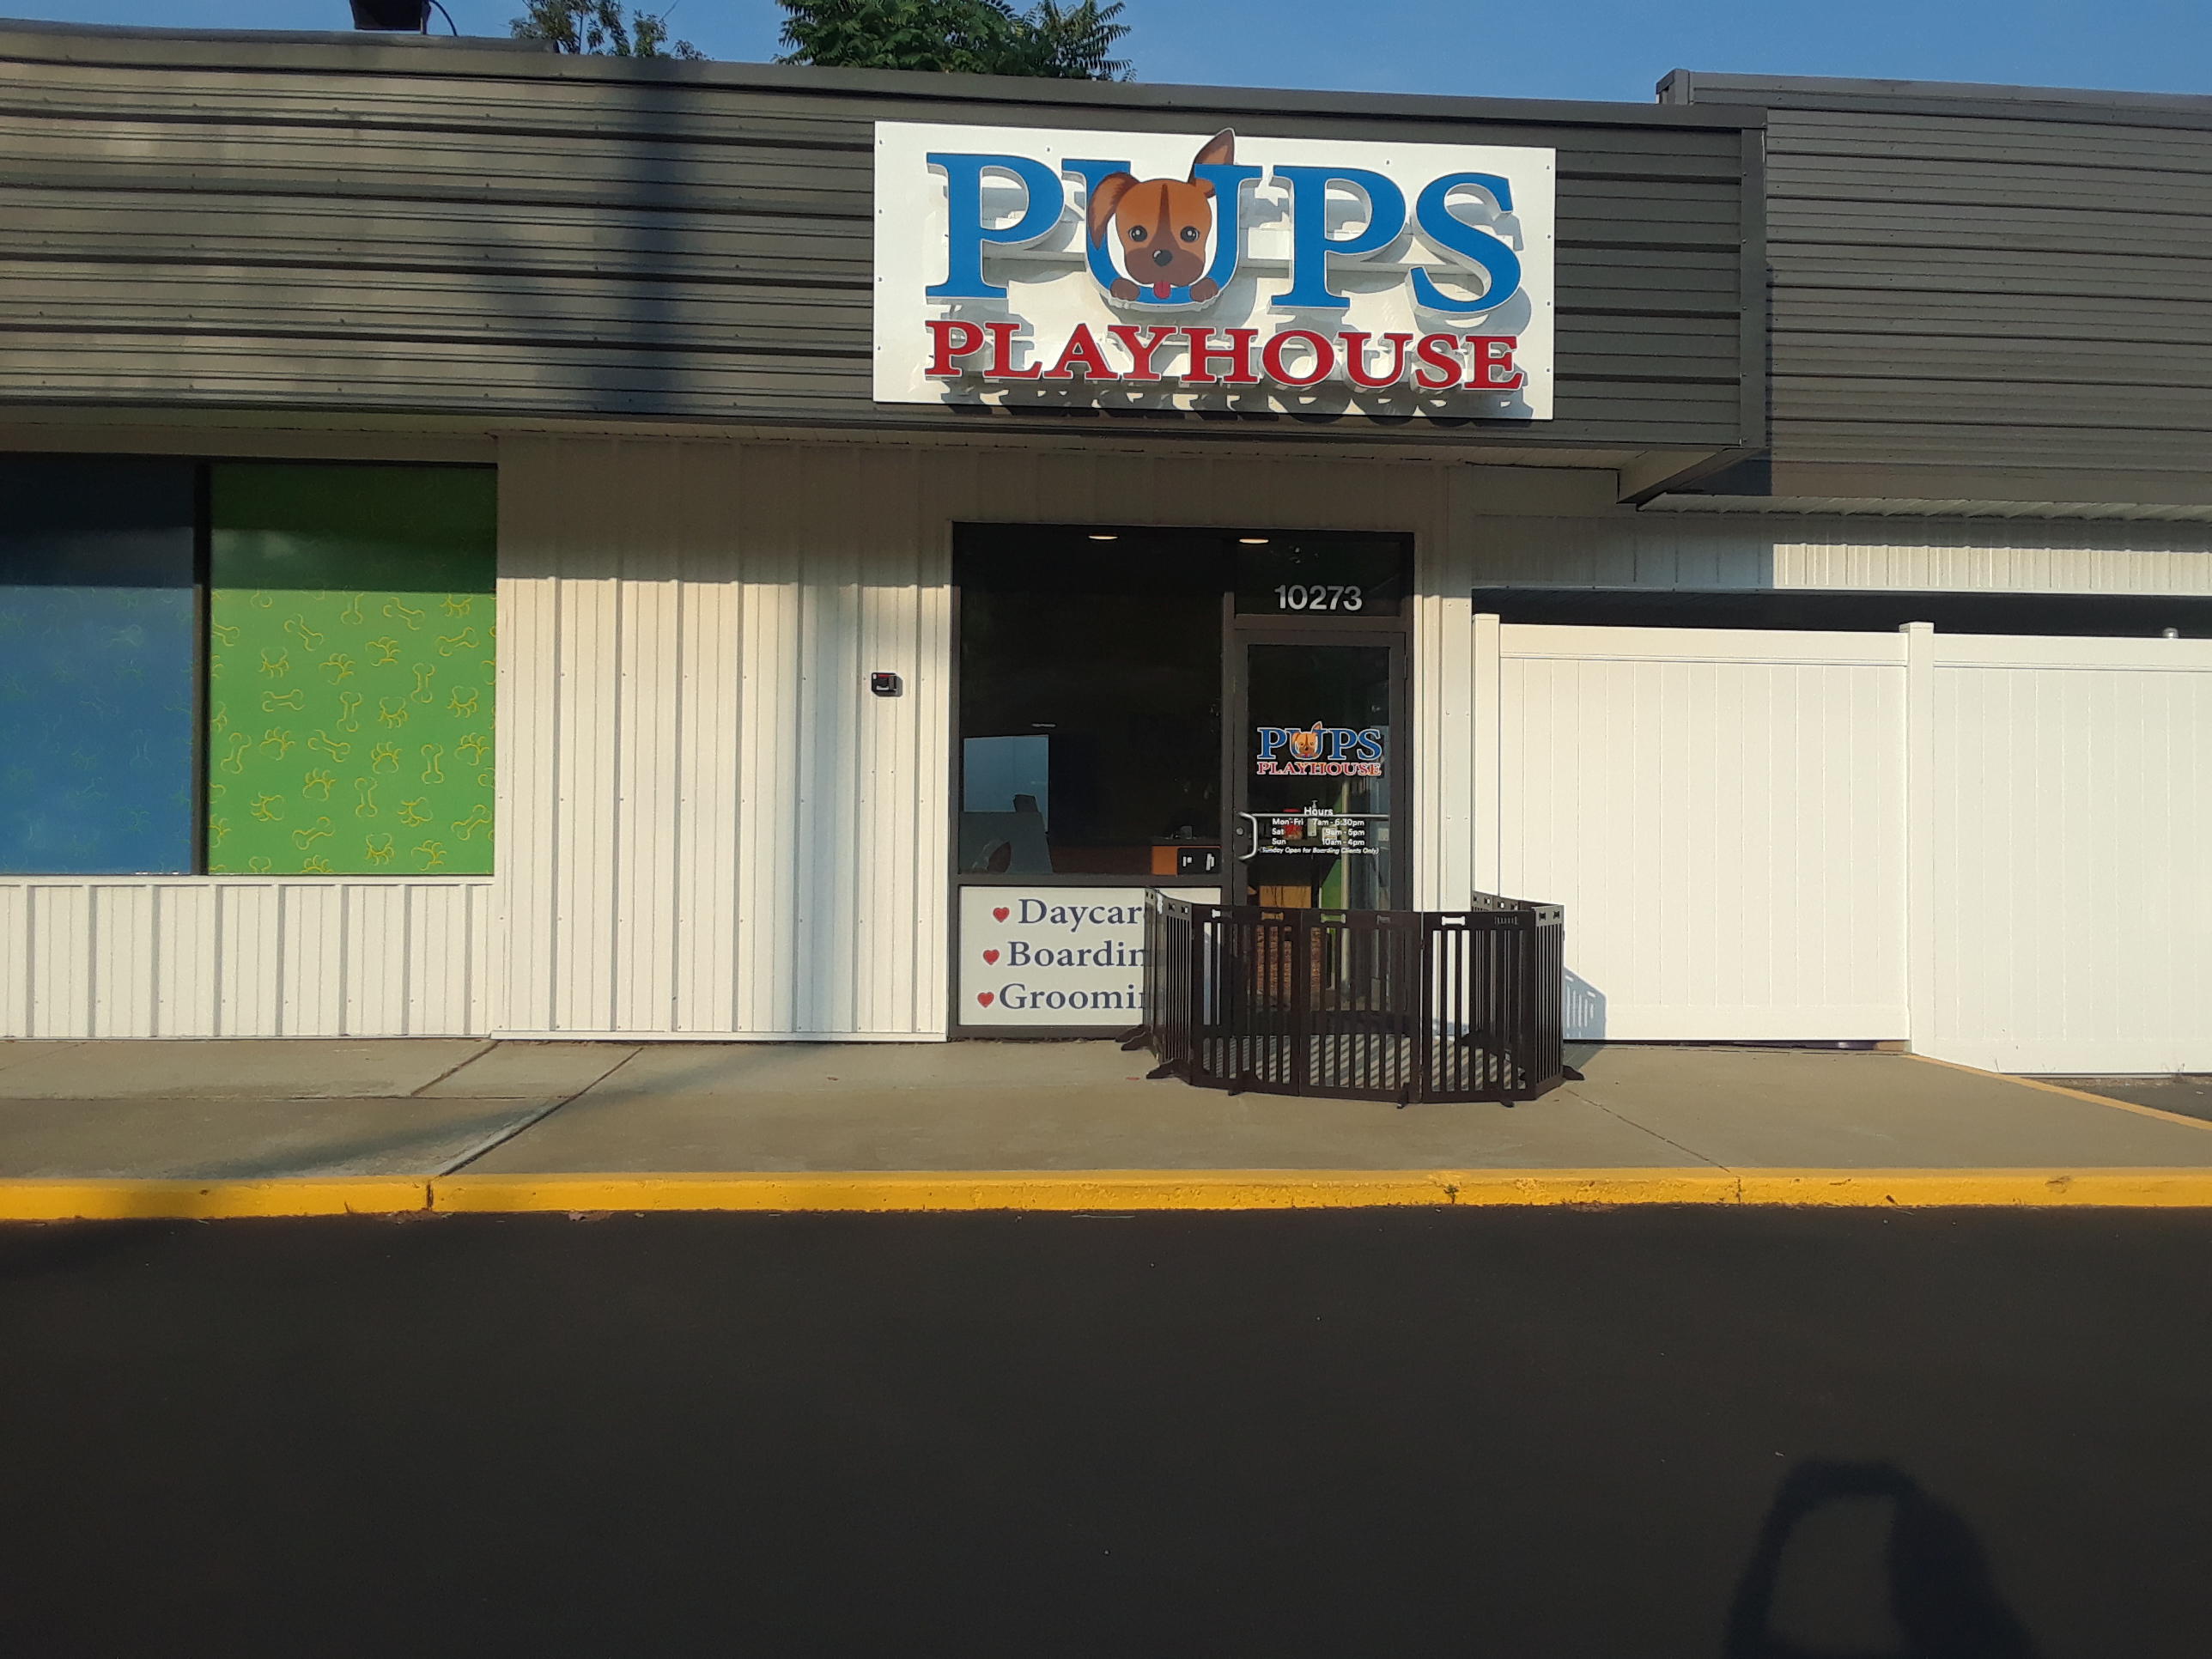 Treat your dog to a fresh look with our Dog Haircut services at Pups Playhouse in Wexford, PA. Our professional groomers are experts at breed-specific cuts and custom styles, ensuring your dog leaves our facility looking sharp and stylish.